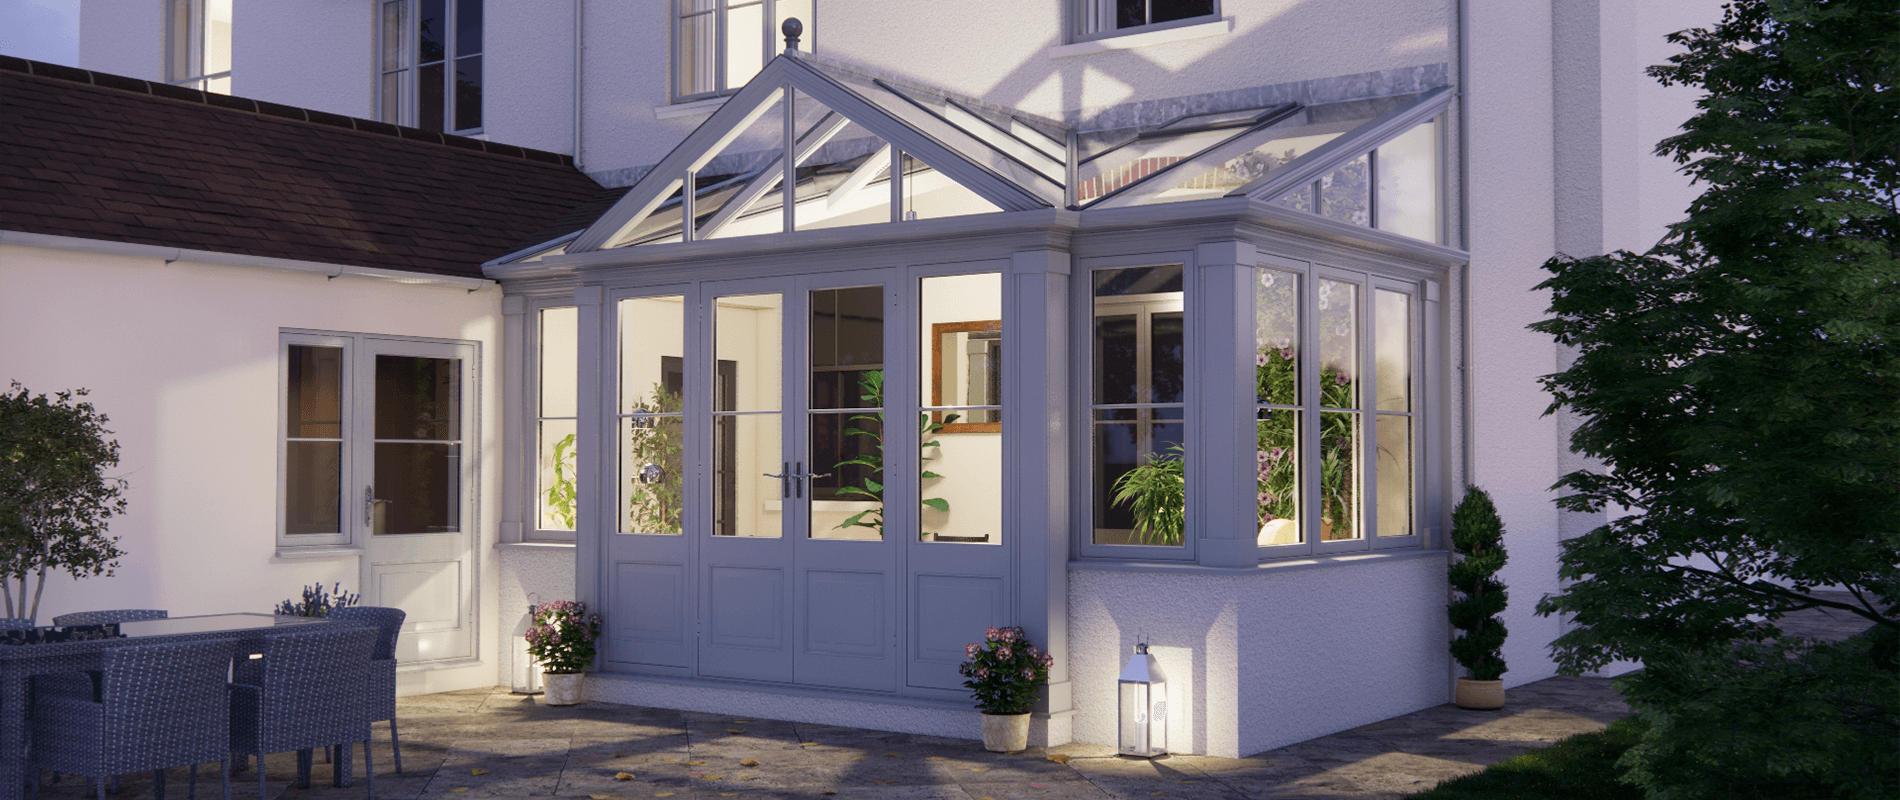 Lean to conservatory with gable dusk.